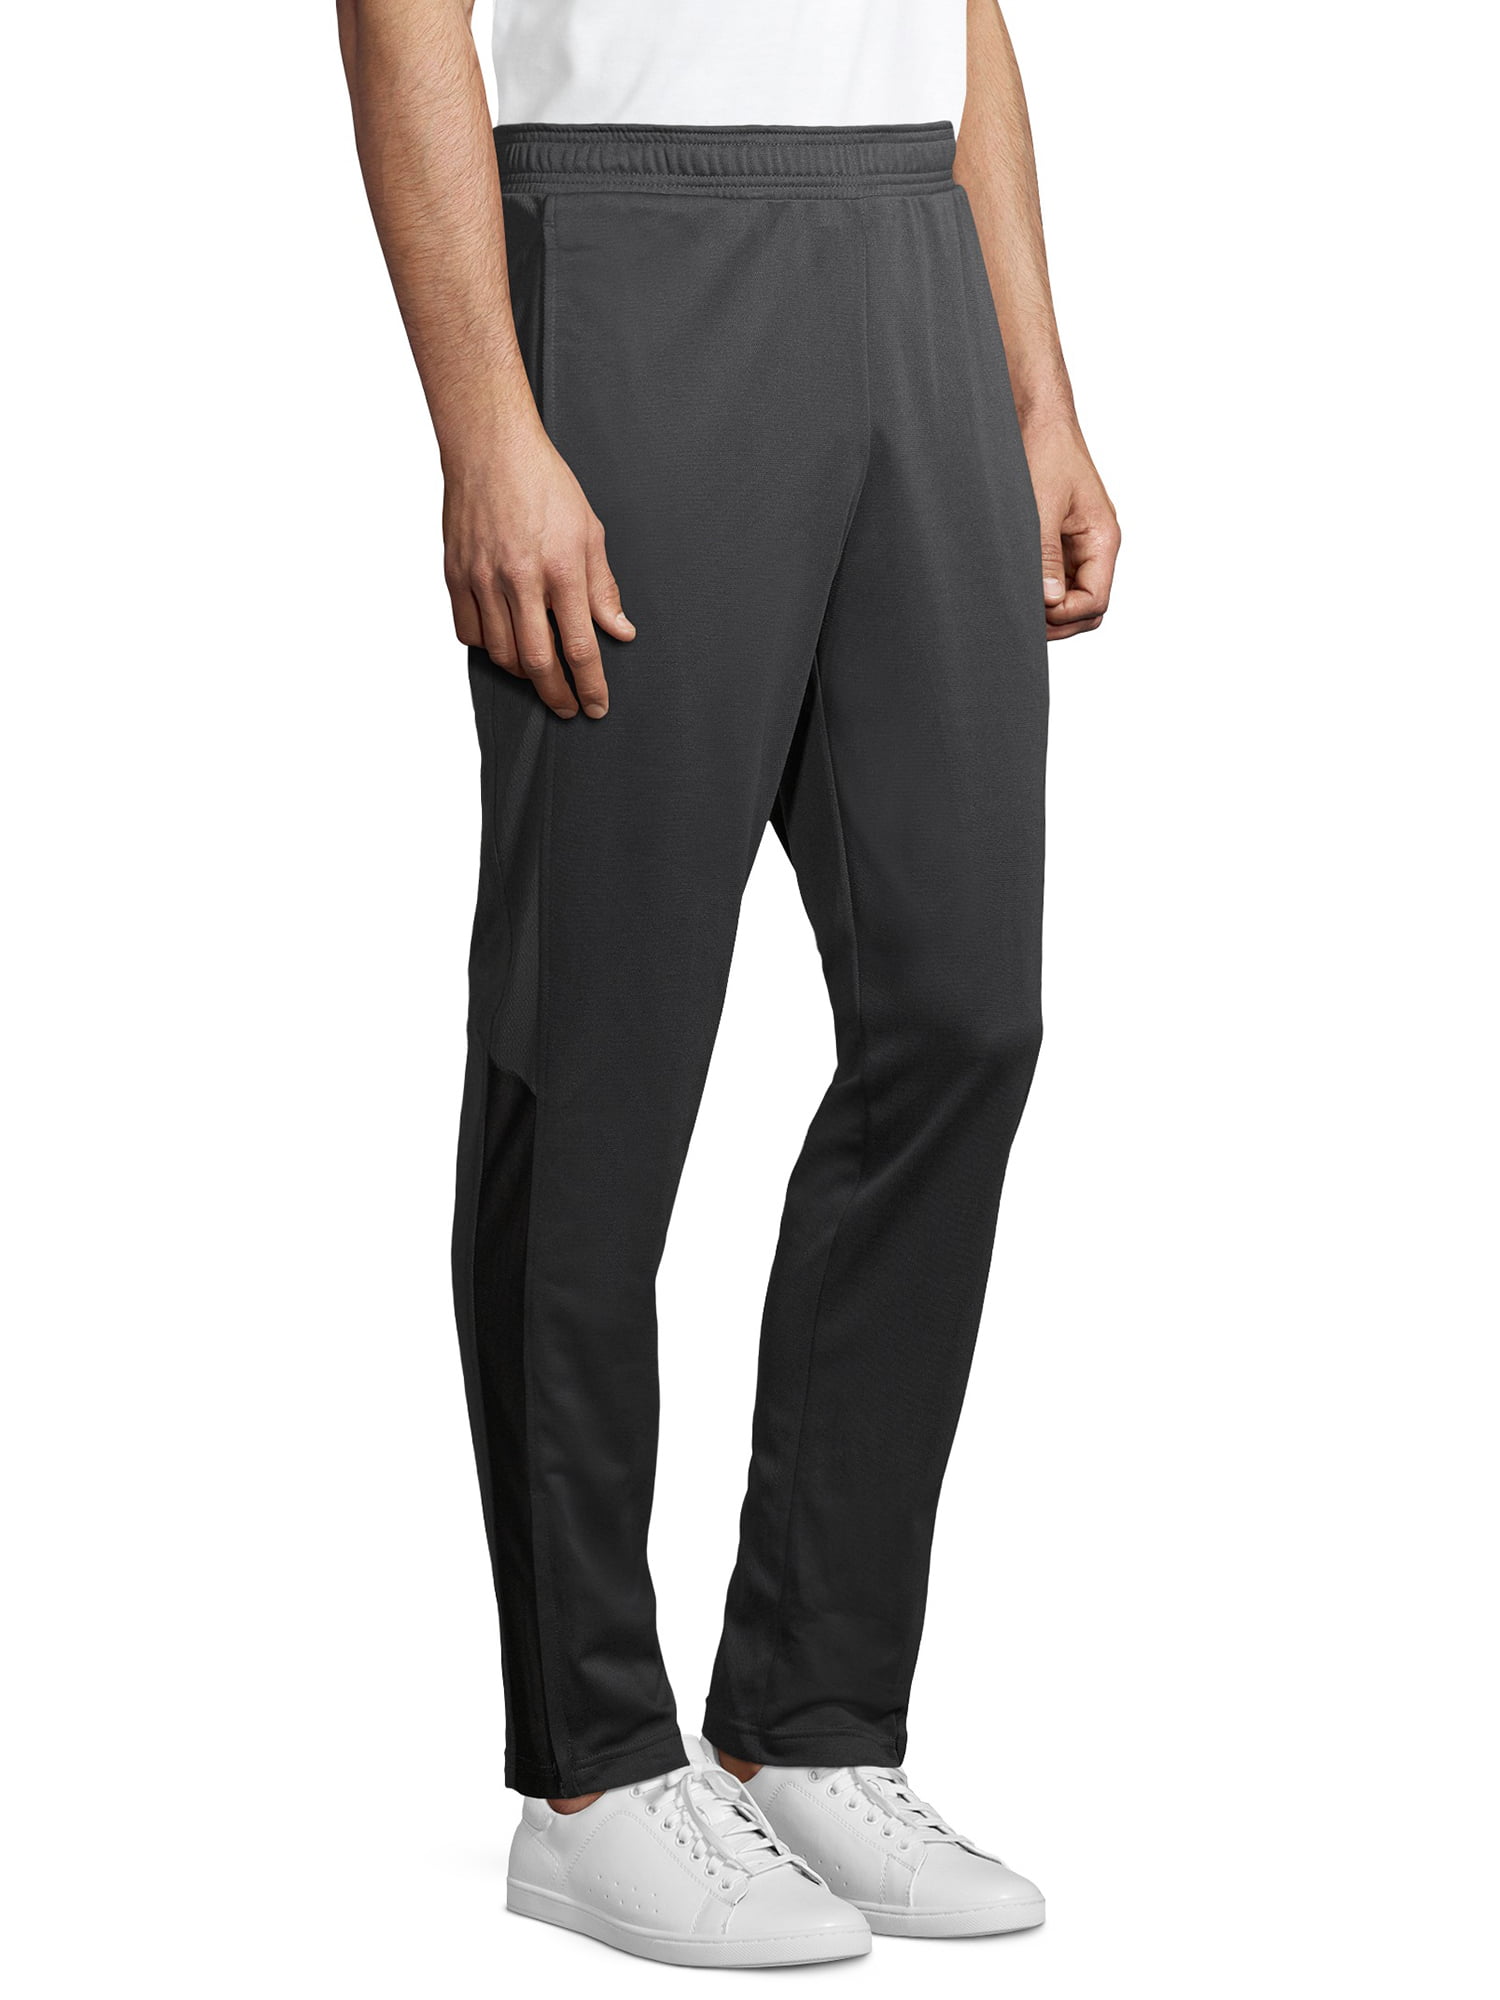 Athletic Works Men's and Big Men's Active Track Pants, up to 5XL